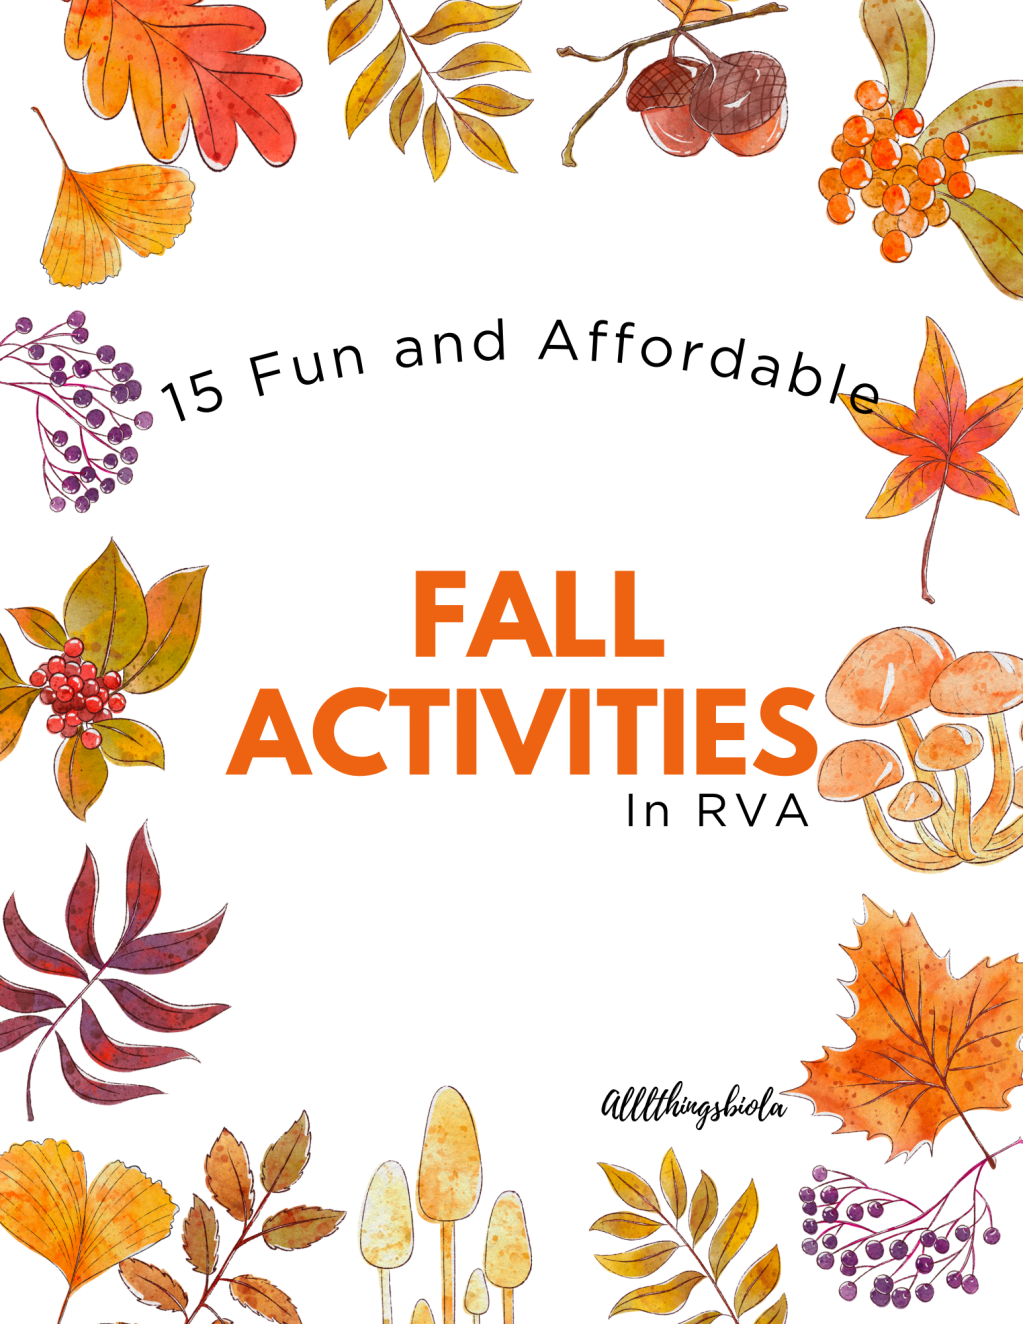 15 Fun and Affordable Fall Activities in RVA for $30 or Less